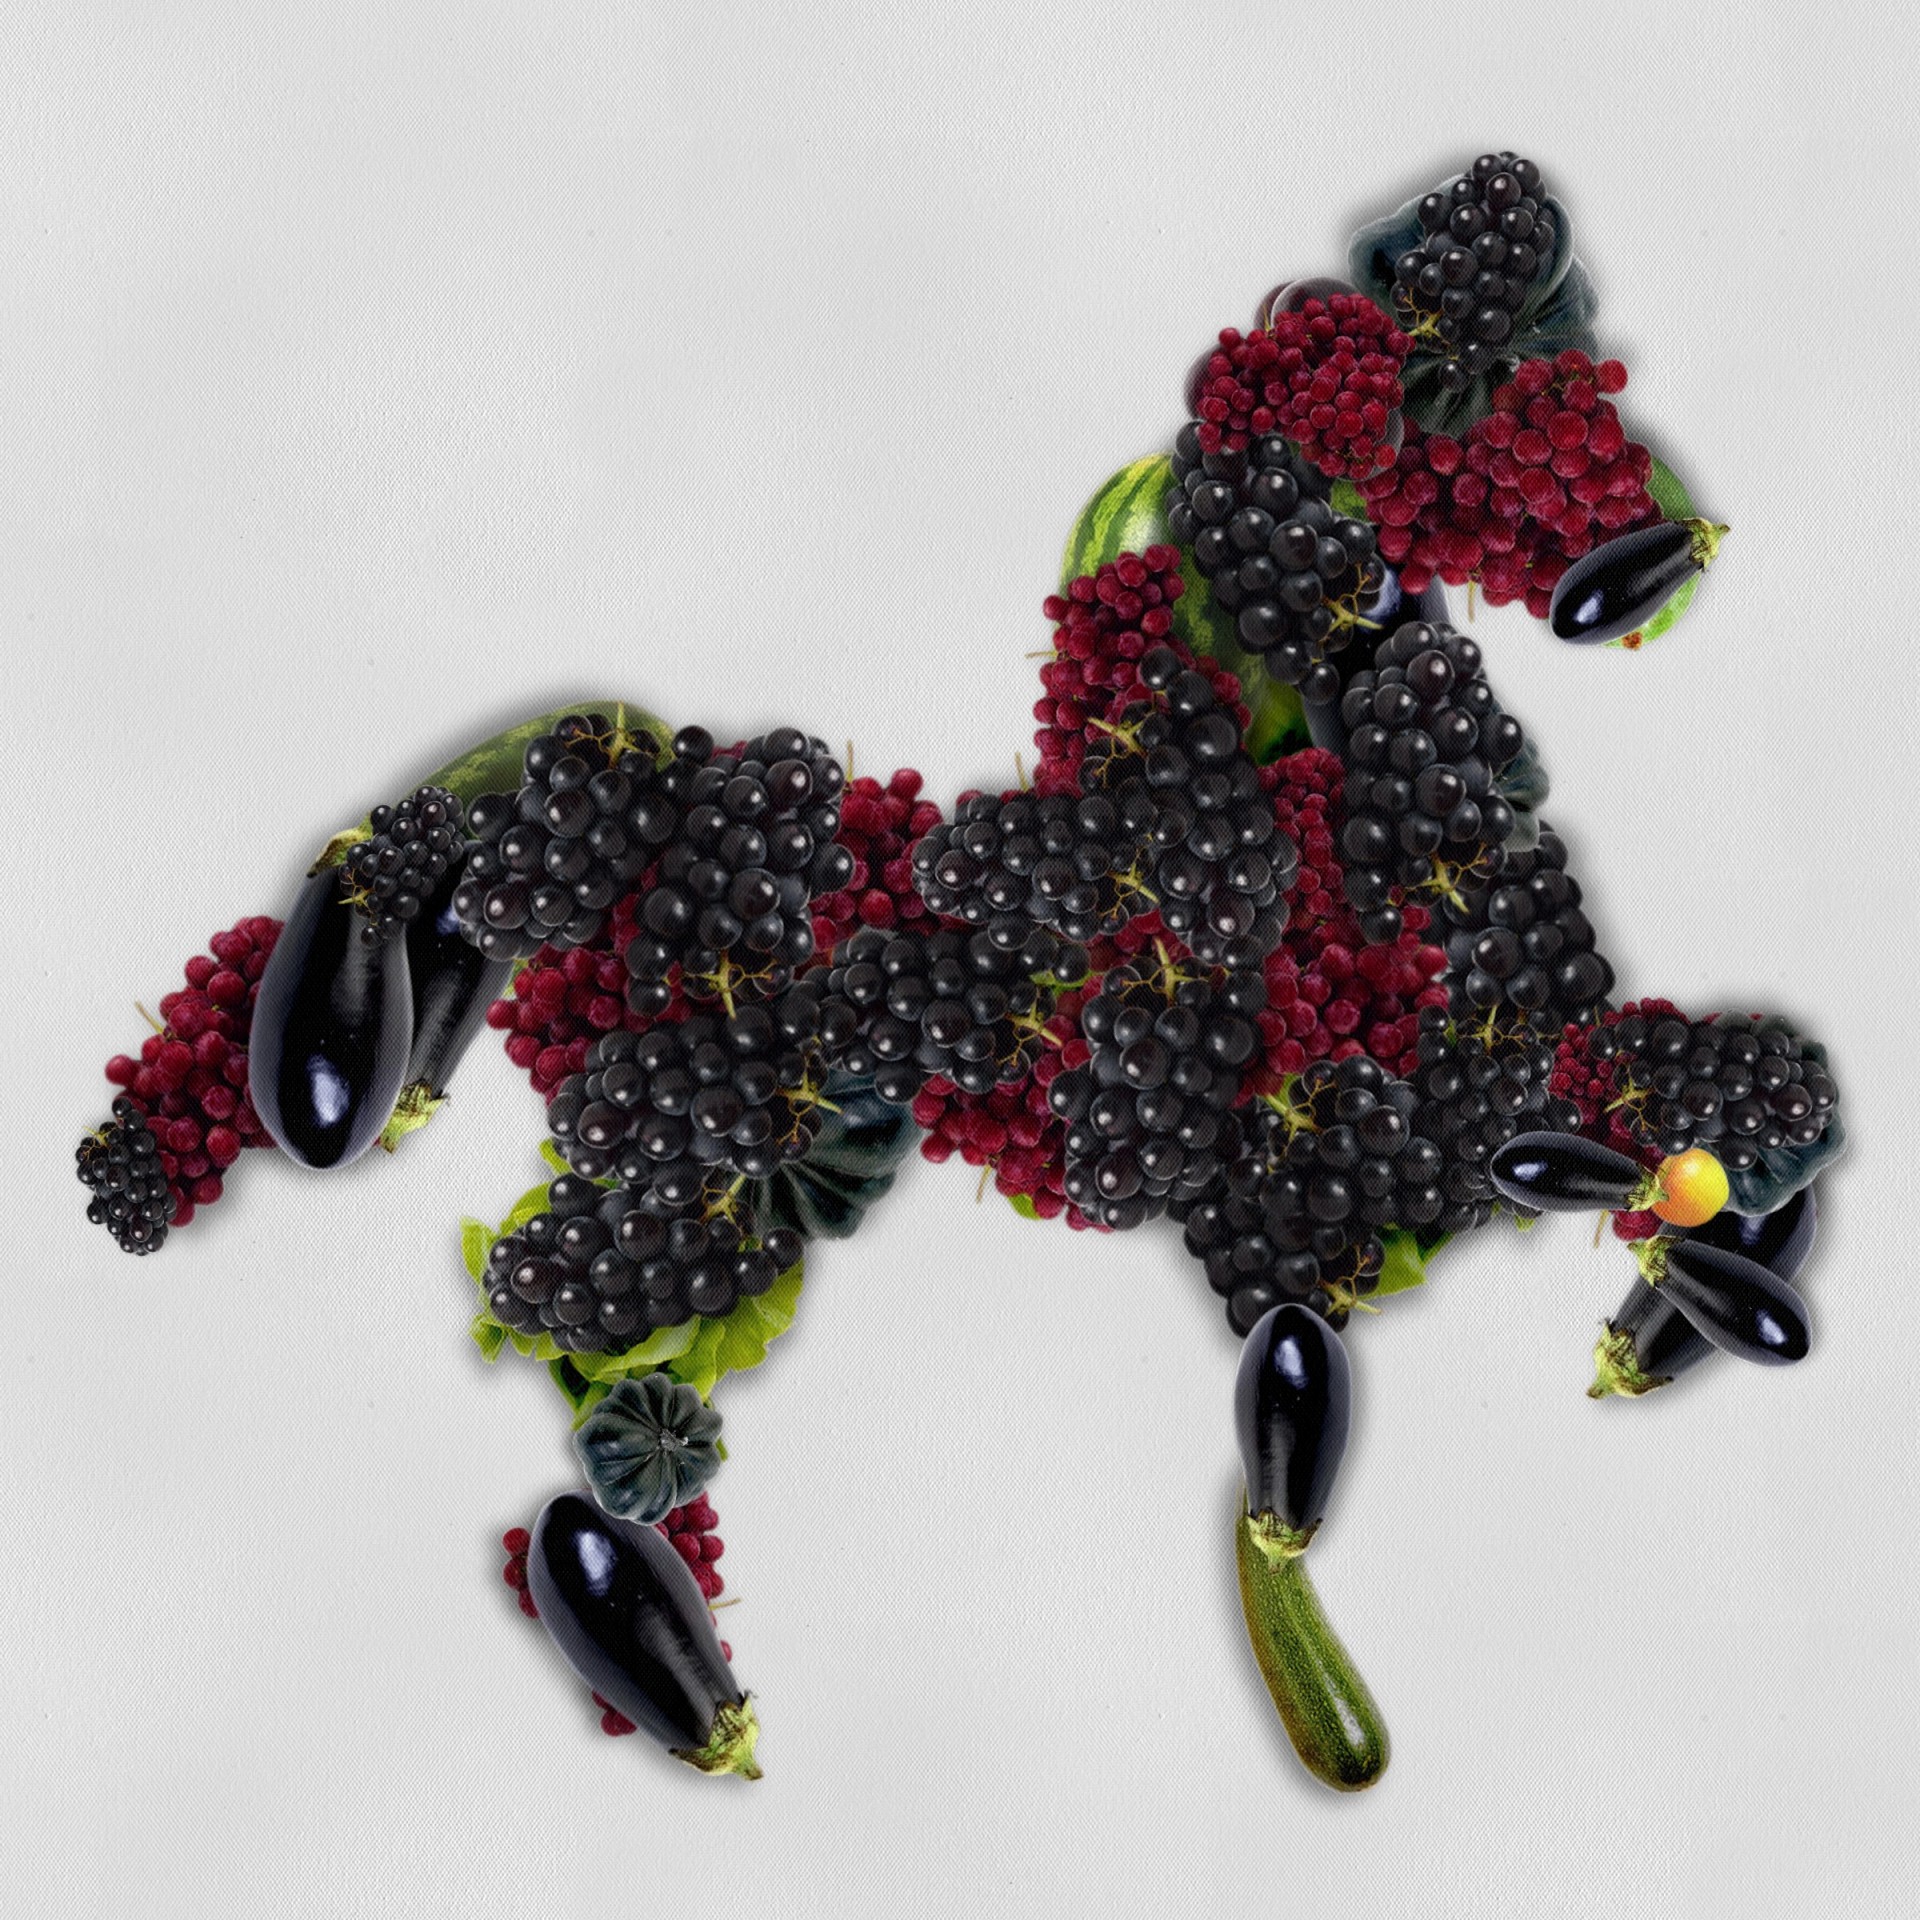 vegetable silhouette horse free photo